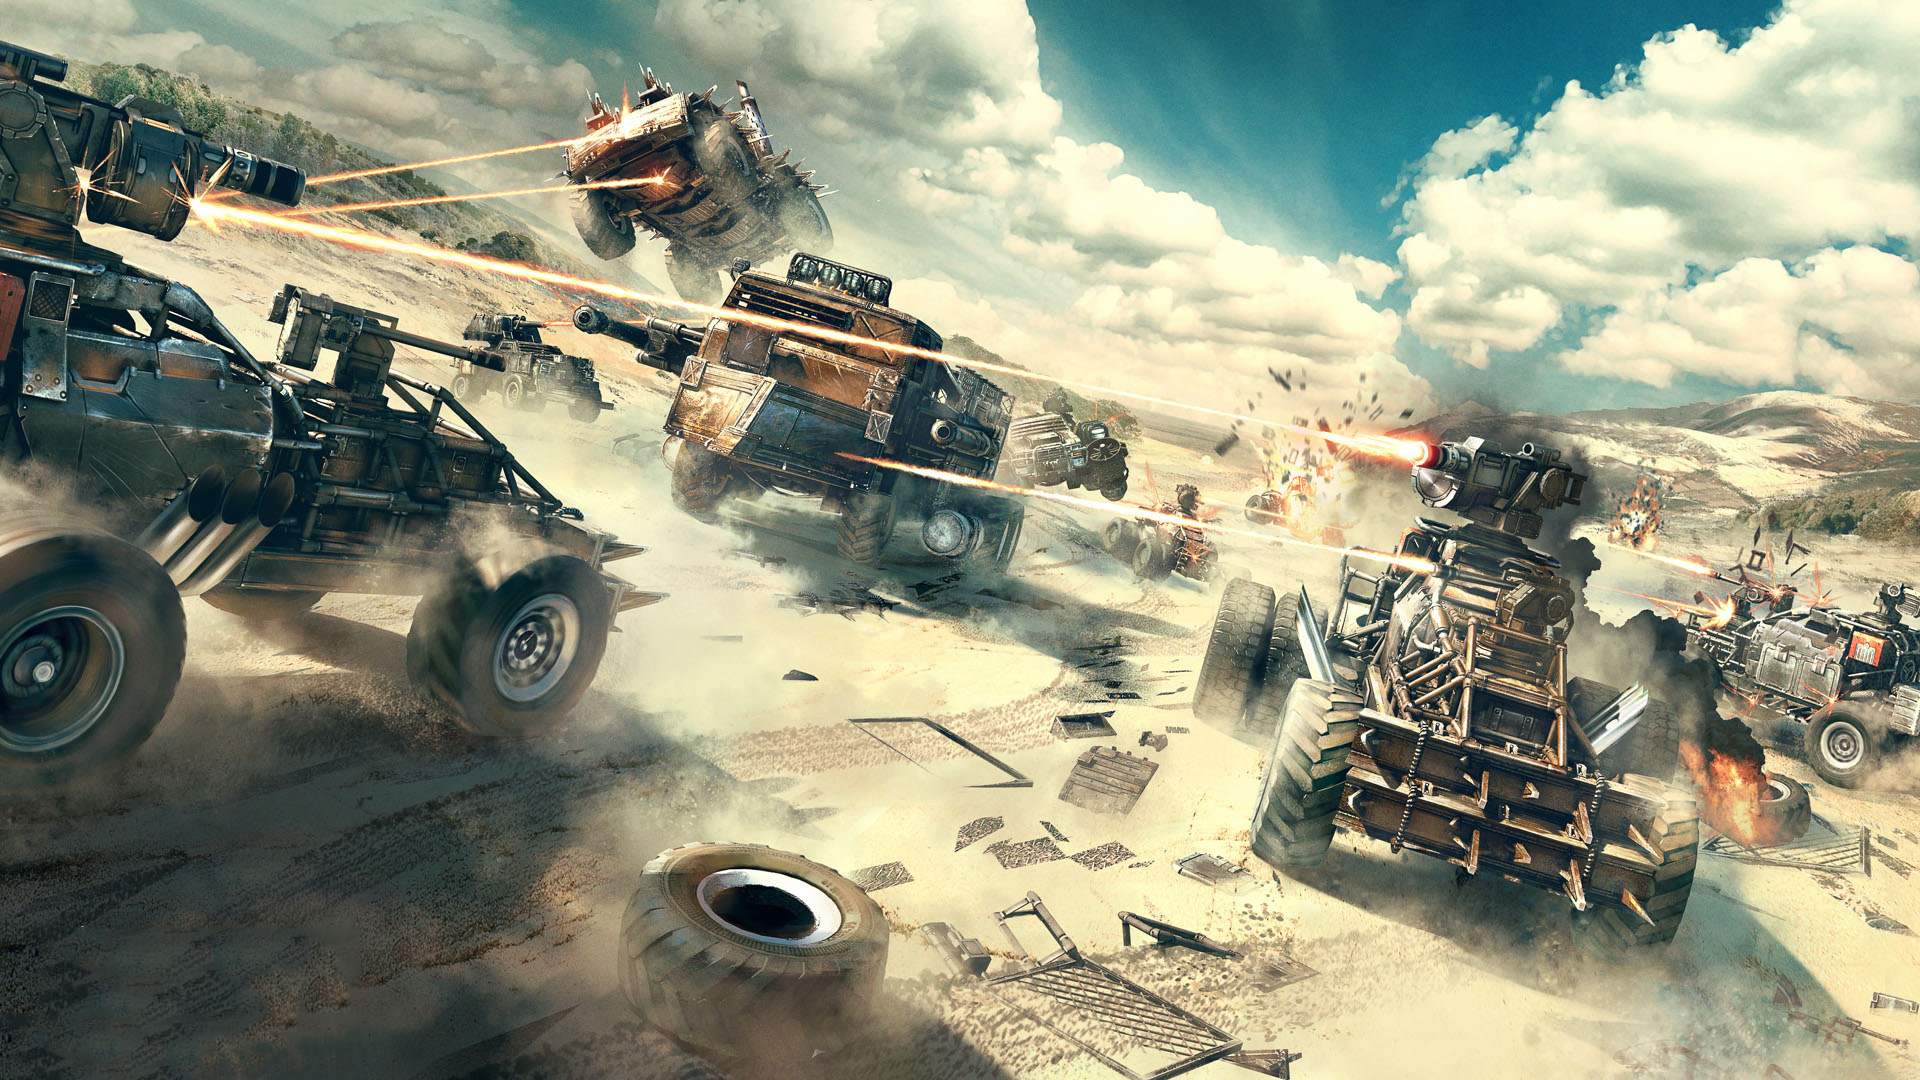 The Apocalyptic Vehicular Moba Is Available On Pc, - Crossout Wall Paper , HD Wallpaper & Backgrounds